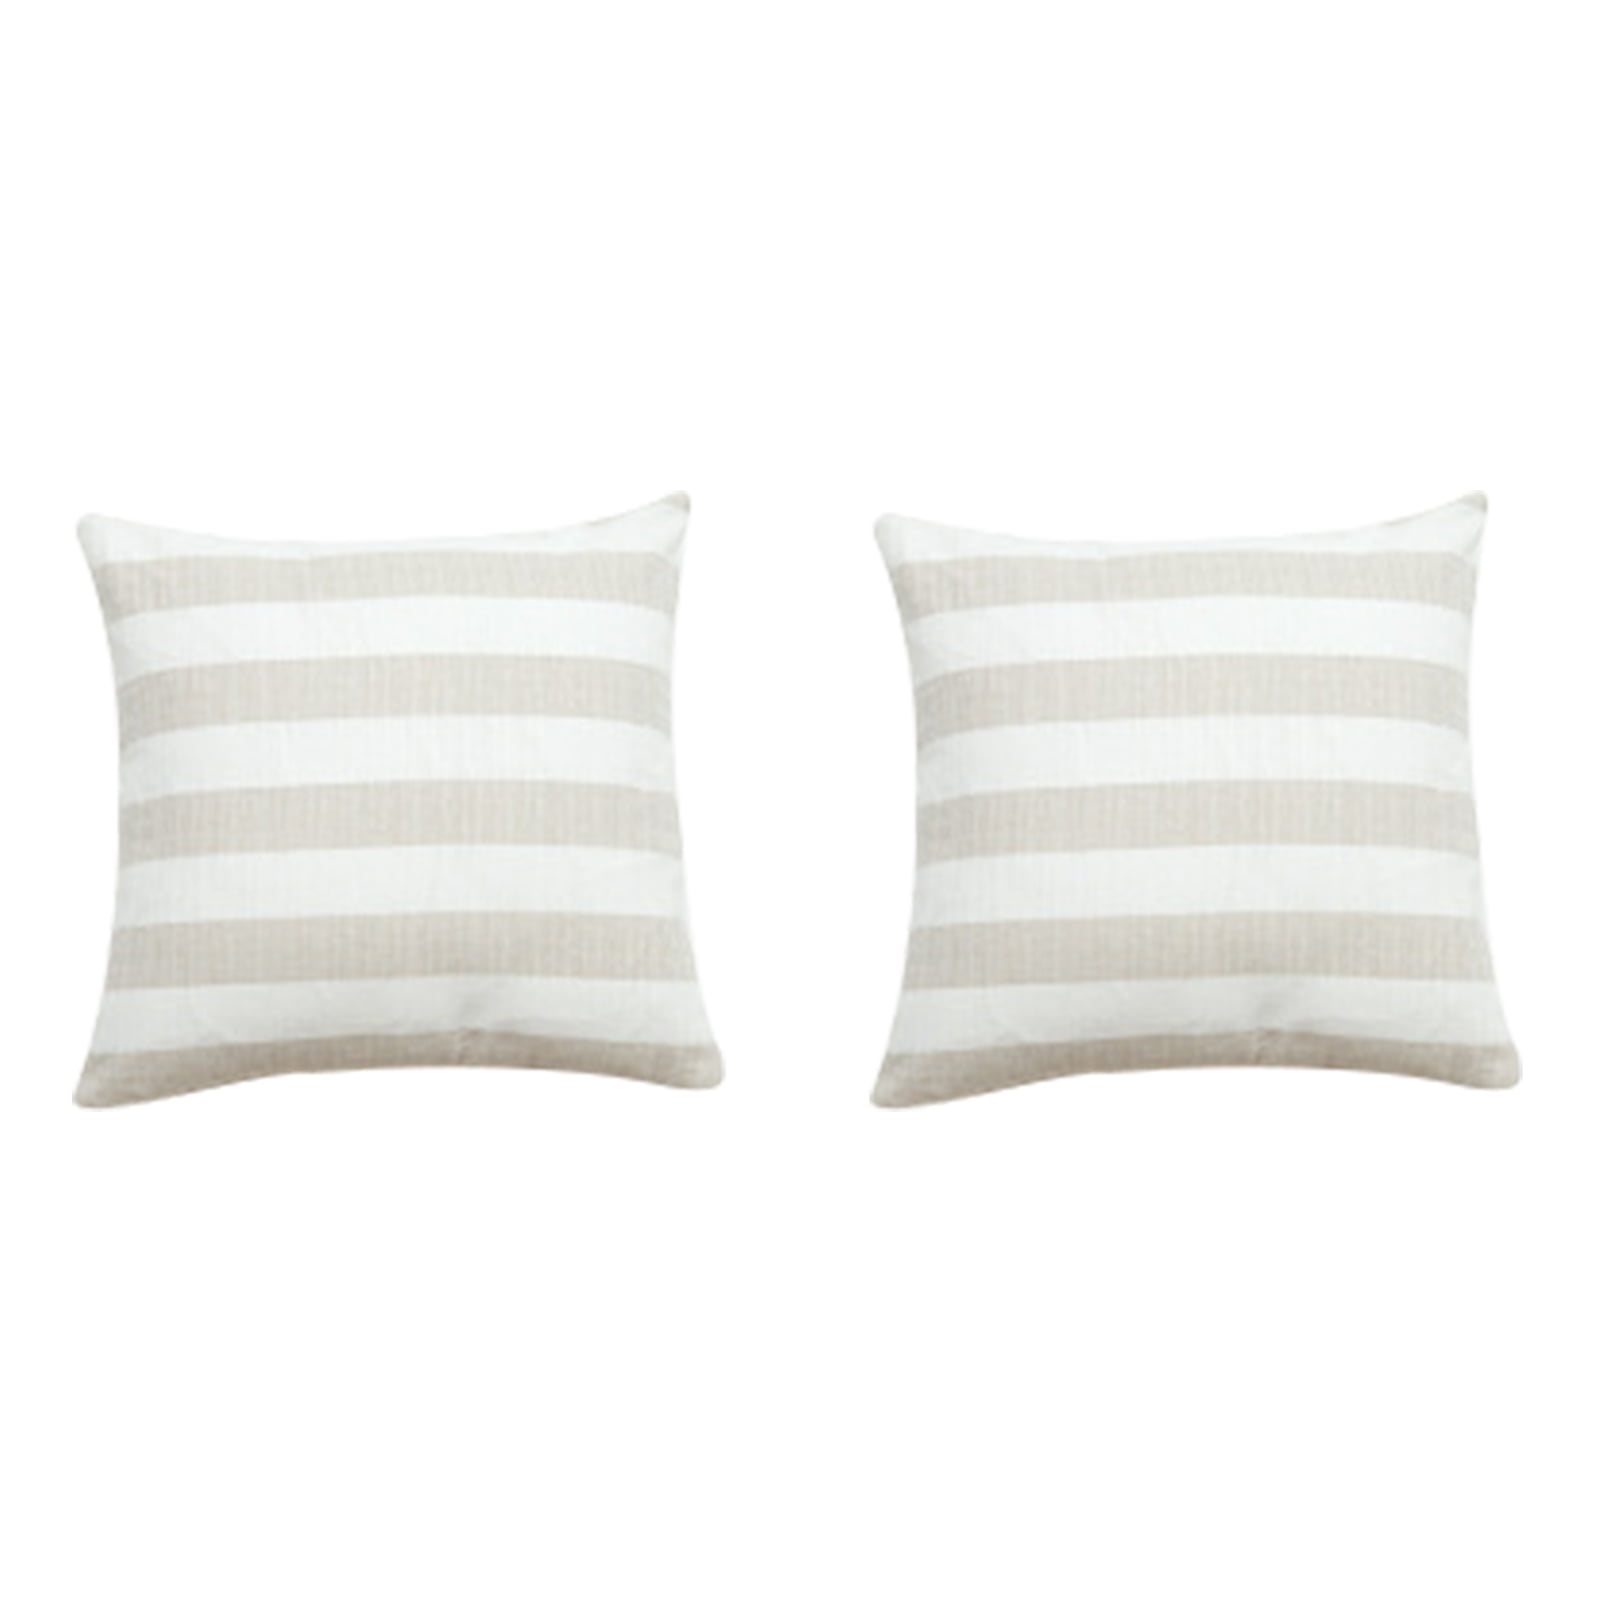 Black And White Stripe Style Linen Pillow Case Cushion Cover 